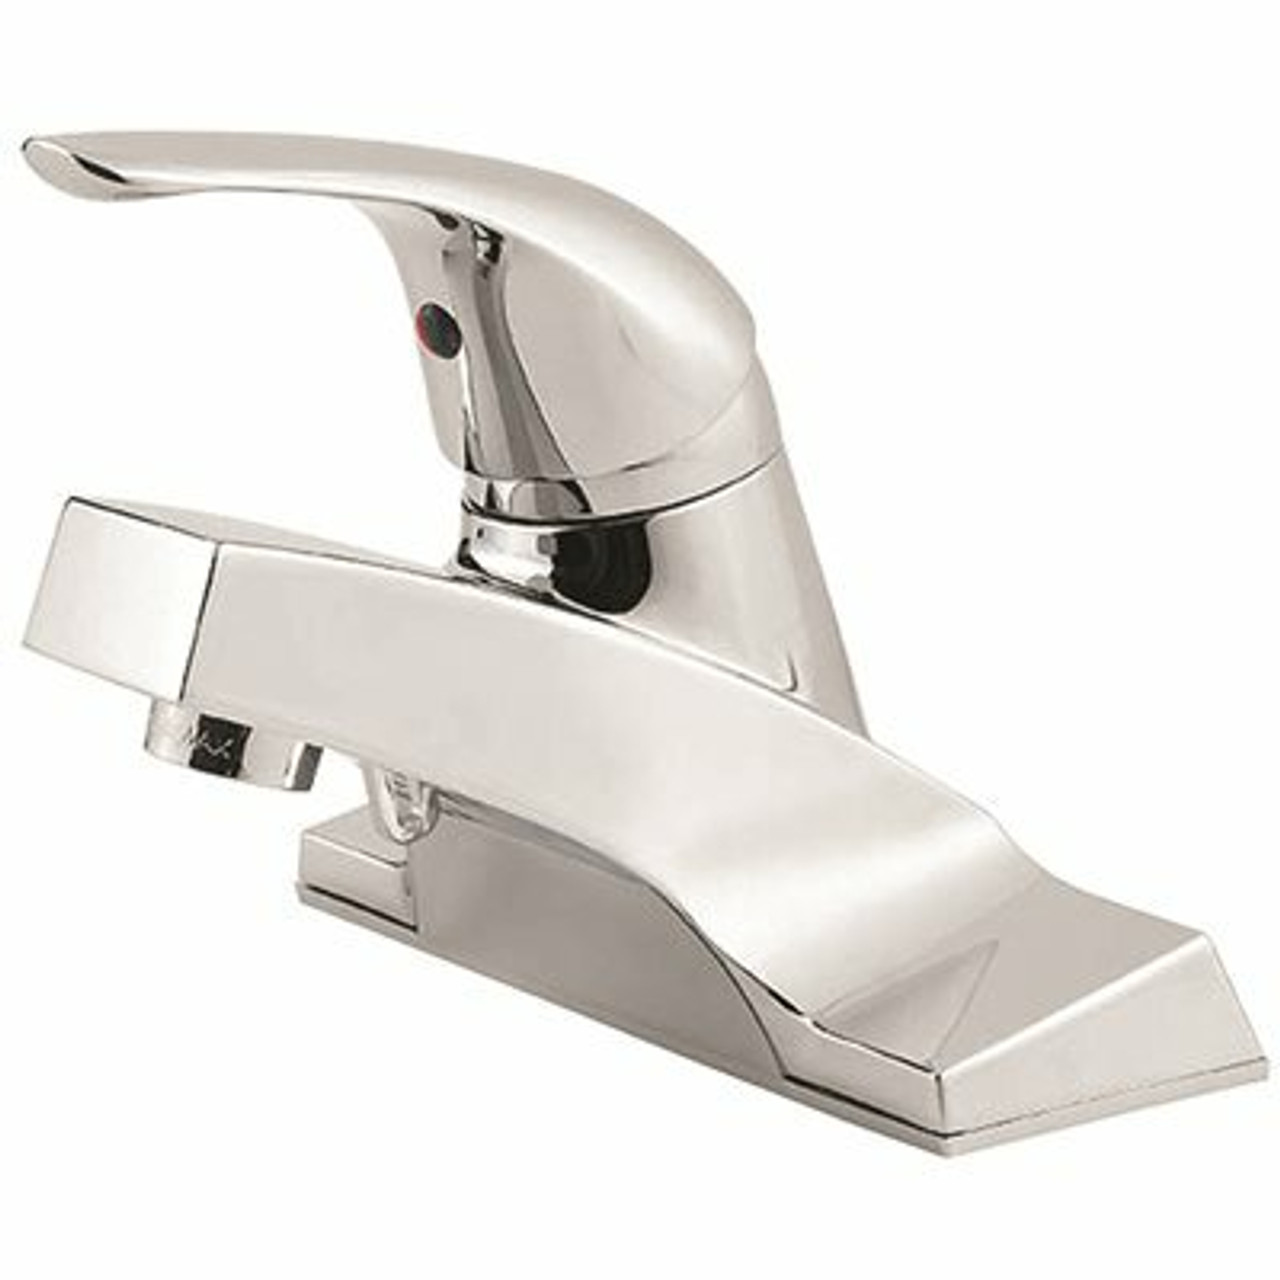 Pfister Pfirst Series 4 in. Centerset Single-Handle Bathroom Faucet In Polished Chrome